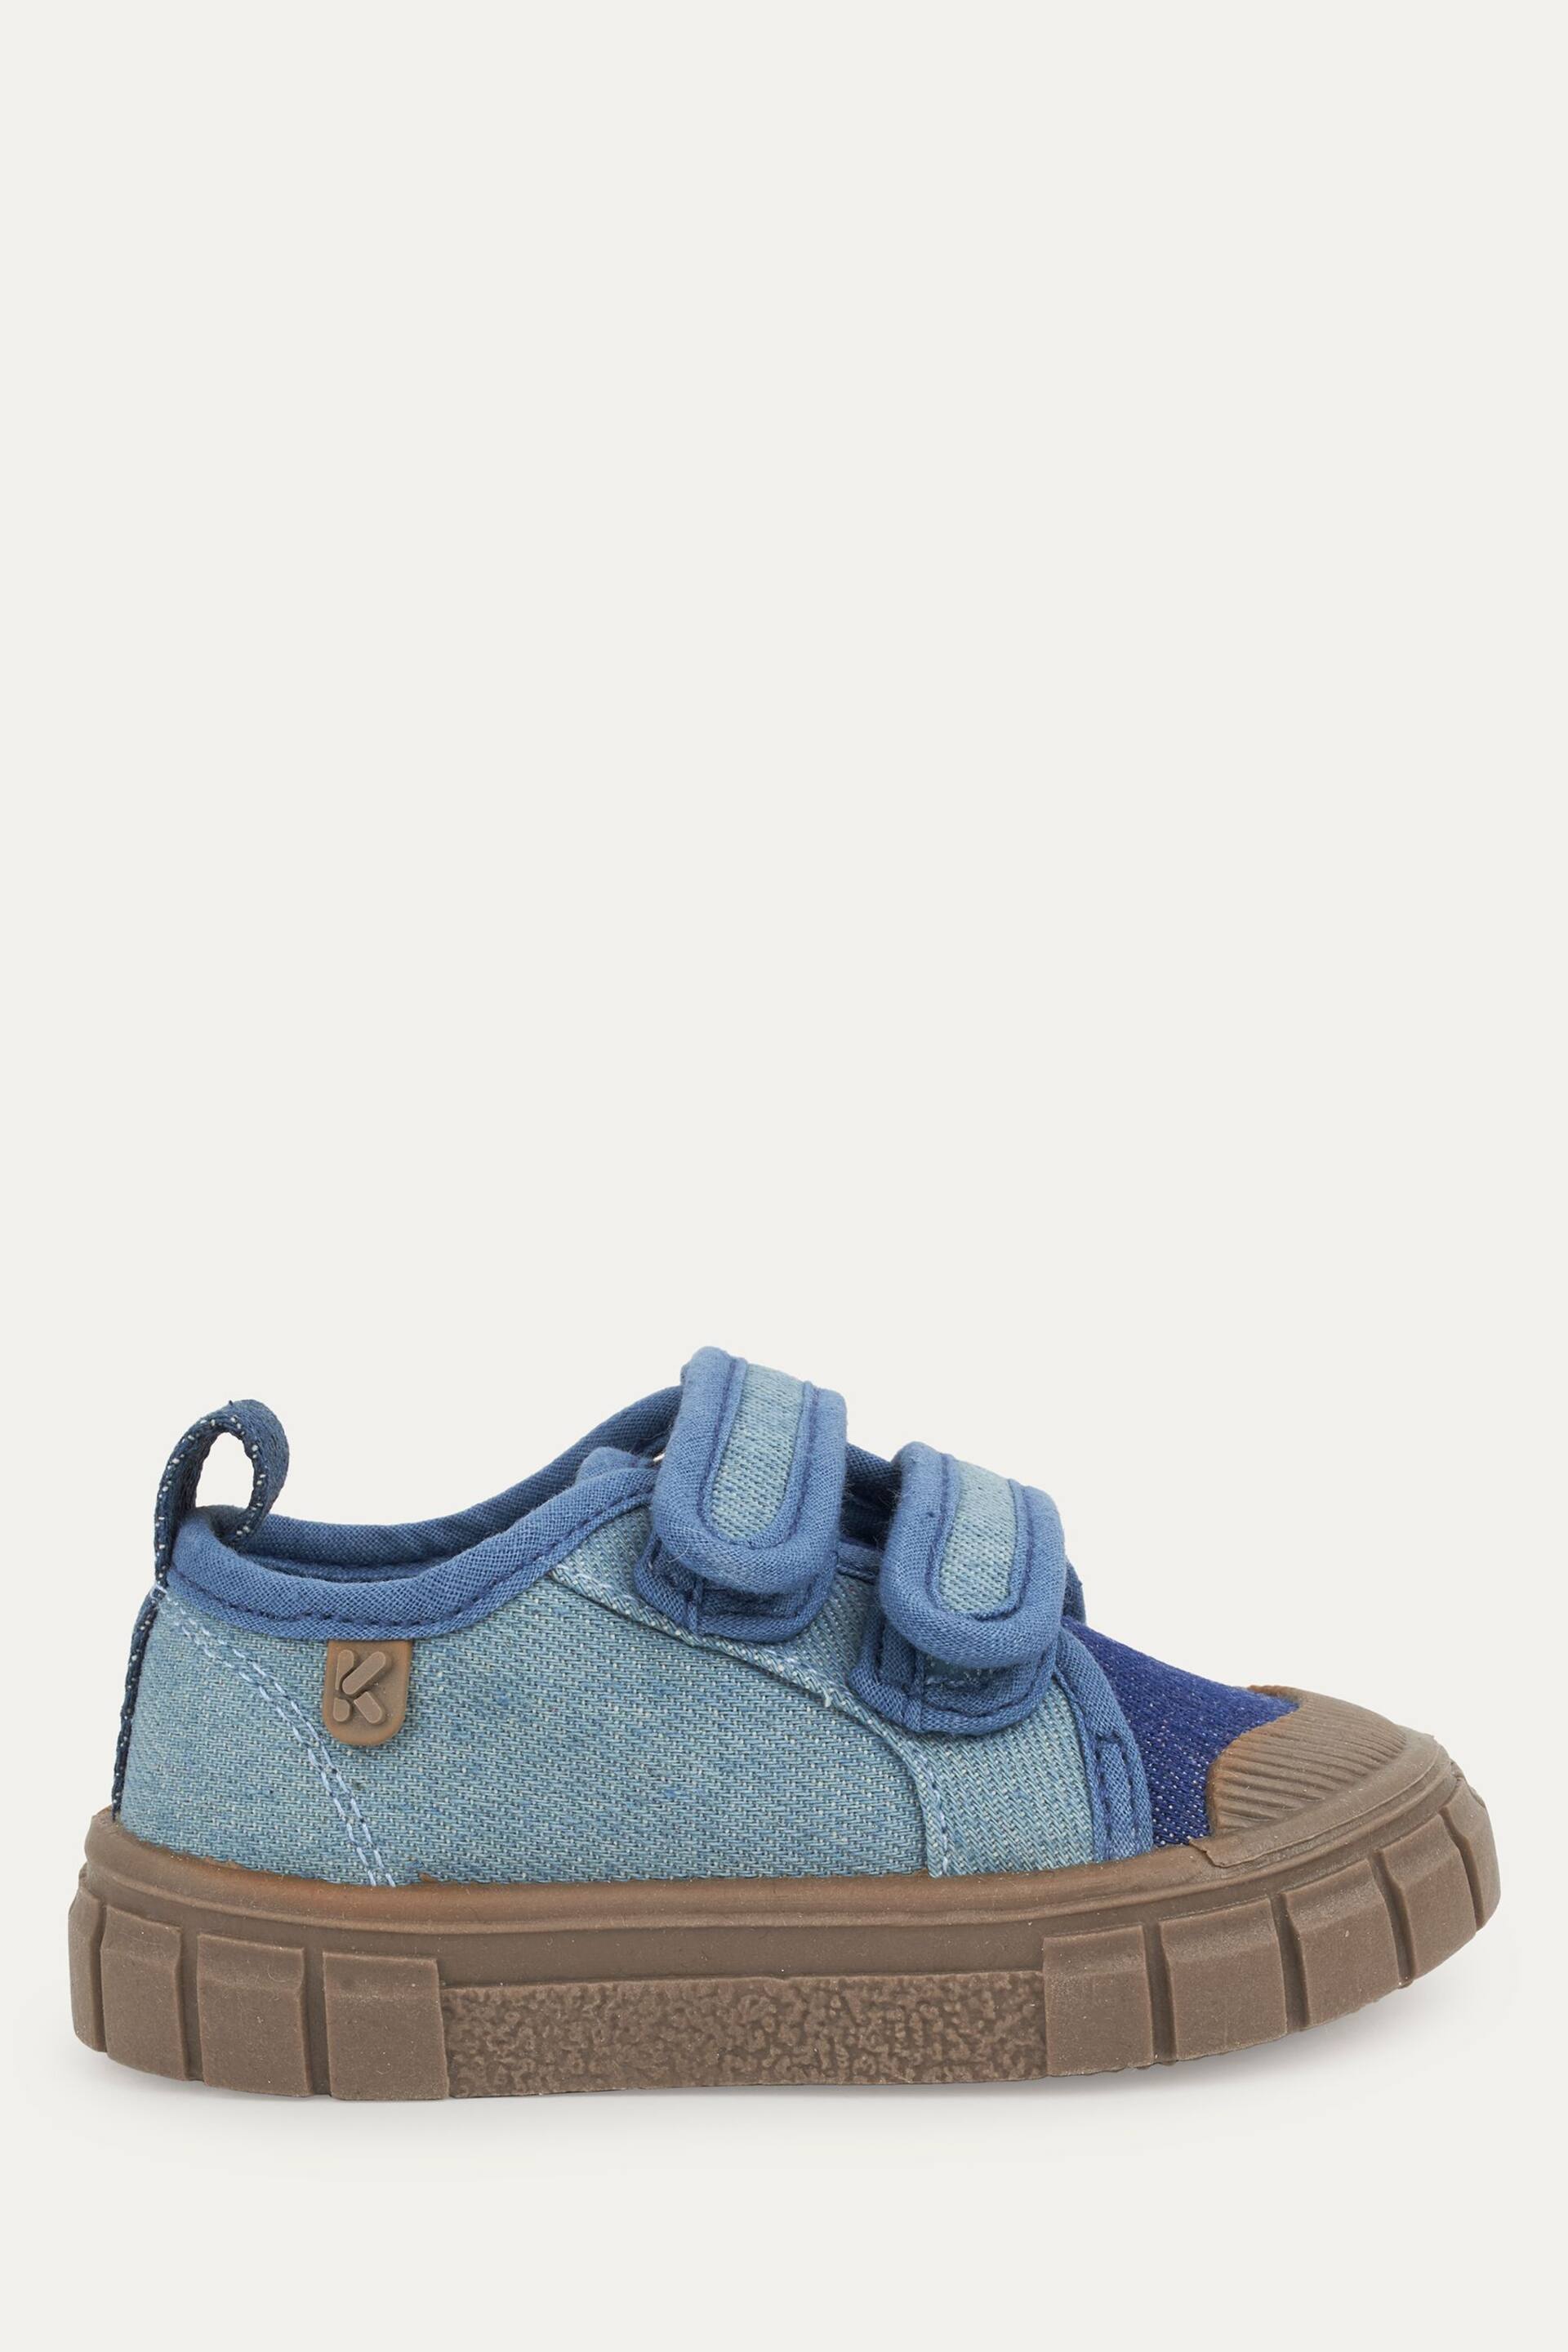 KIDLY Blue Denim Canvas Trainers - Image 1 of 4